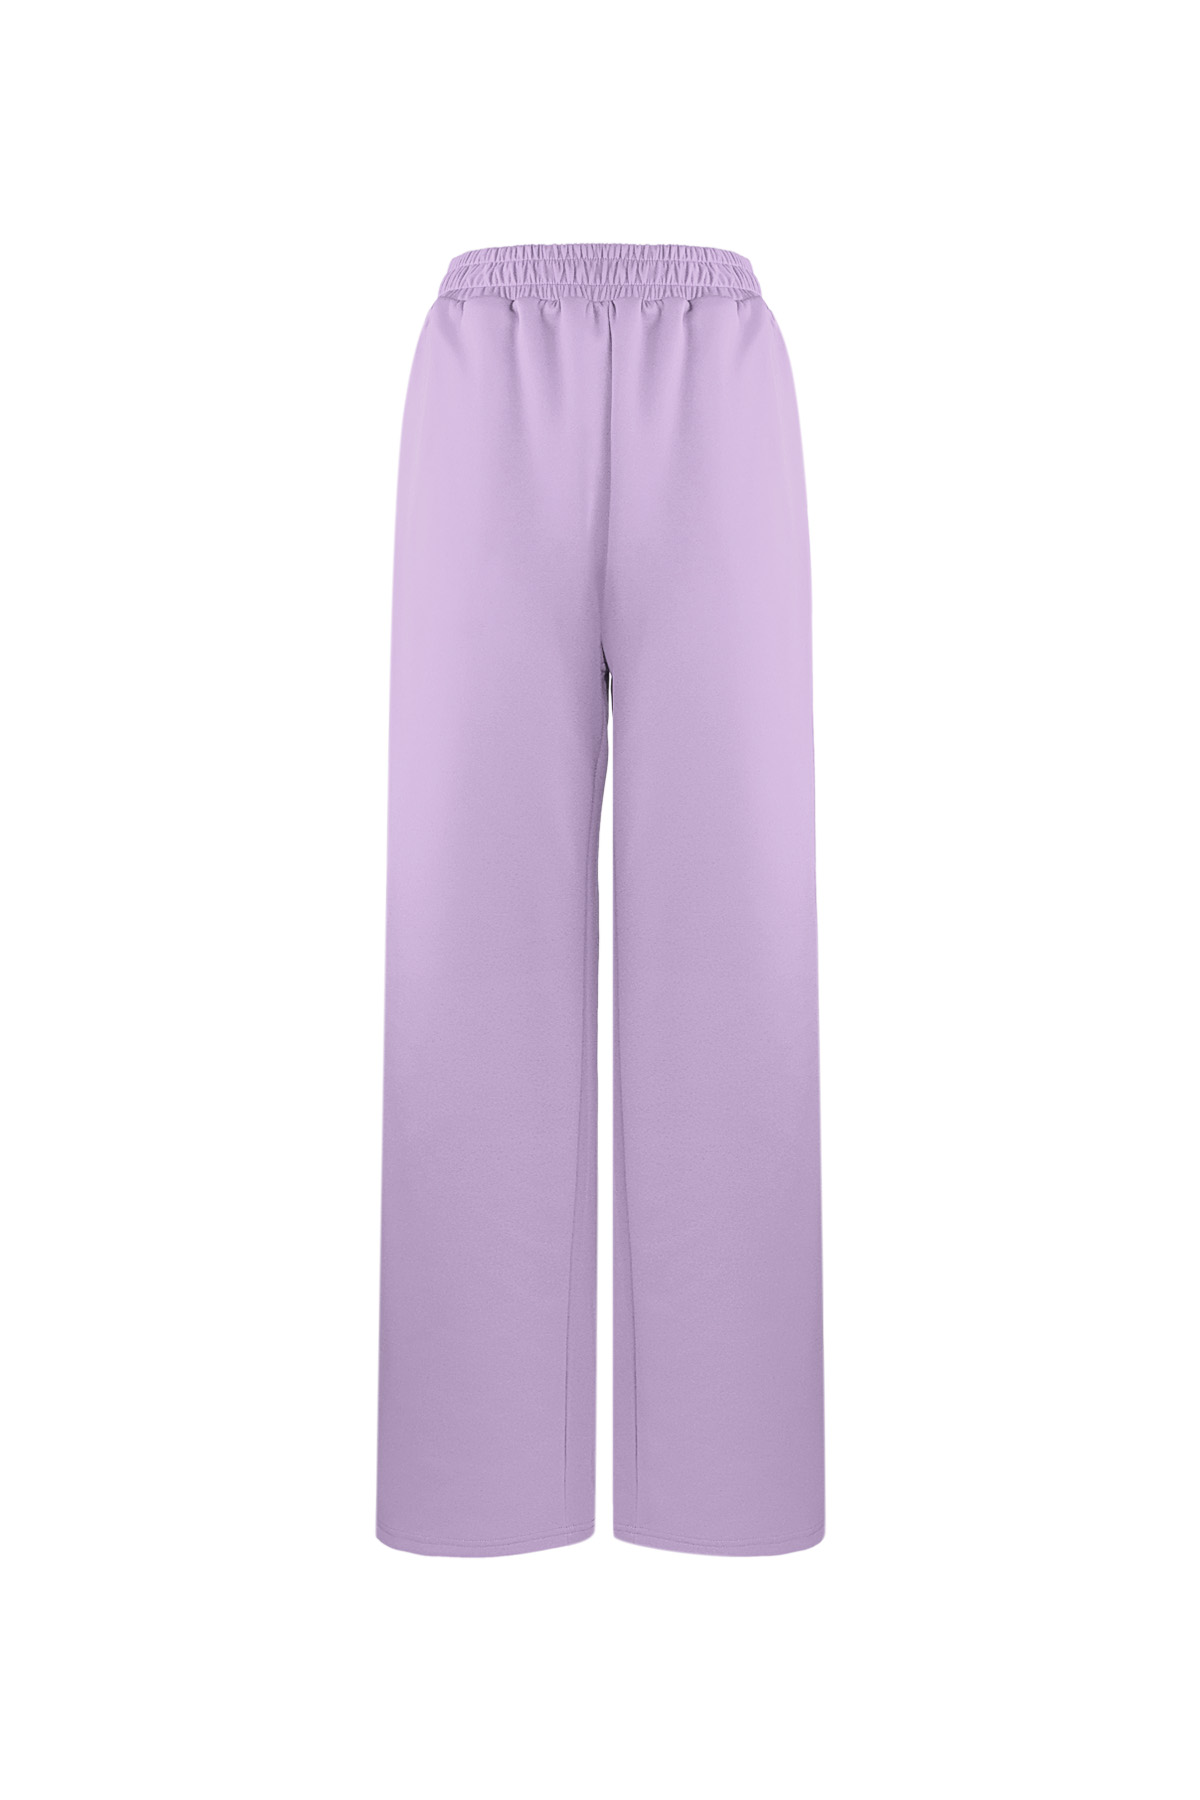 Striped must have pants - purple S